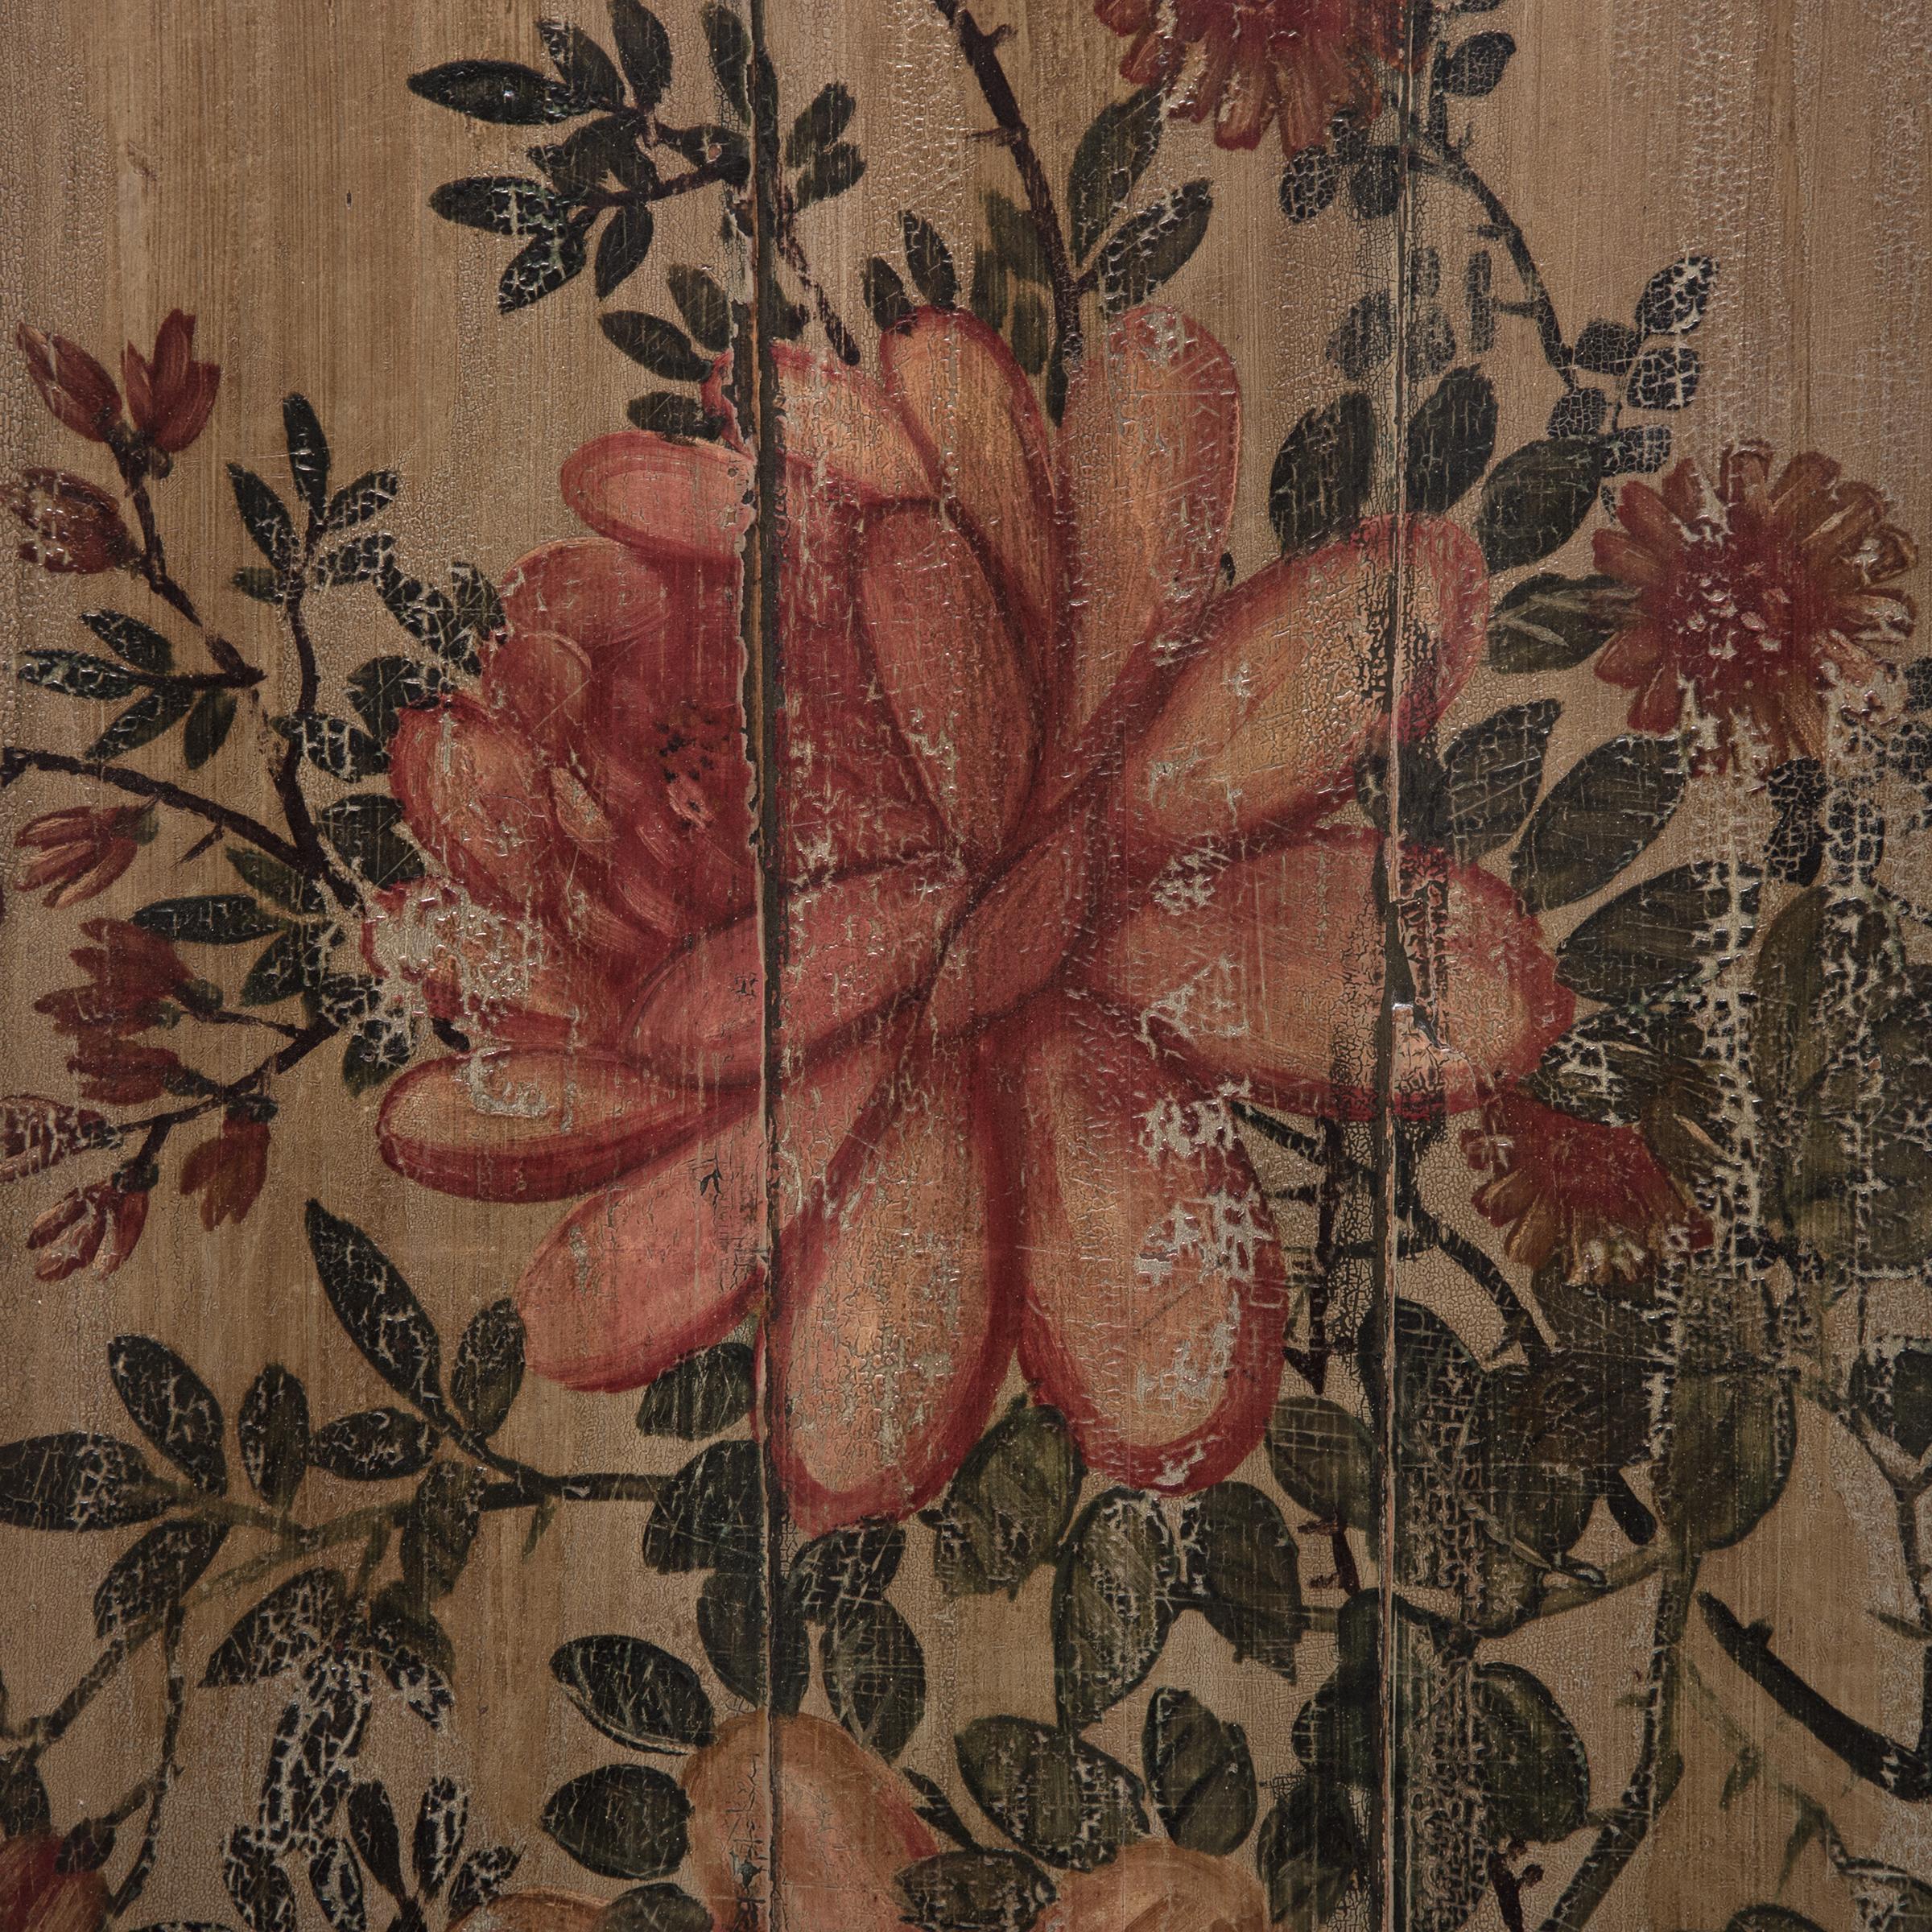 Chinese Floral Longevity Bed Canopy Painting, c. 1850 - Brown Figurative Painting by Unknown